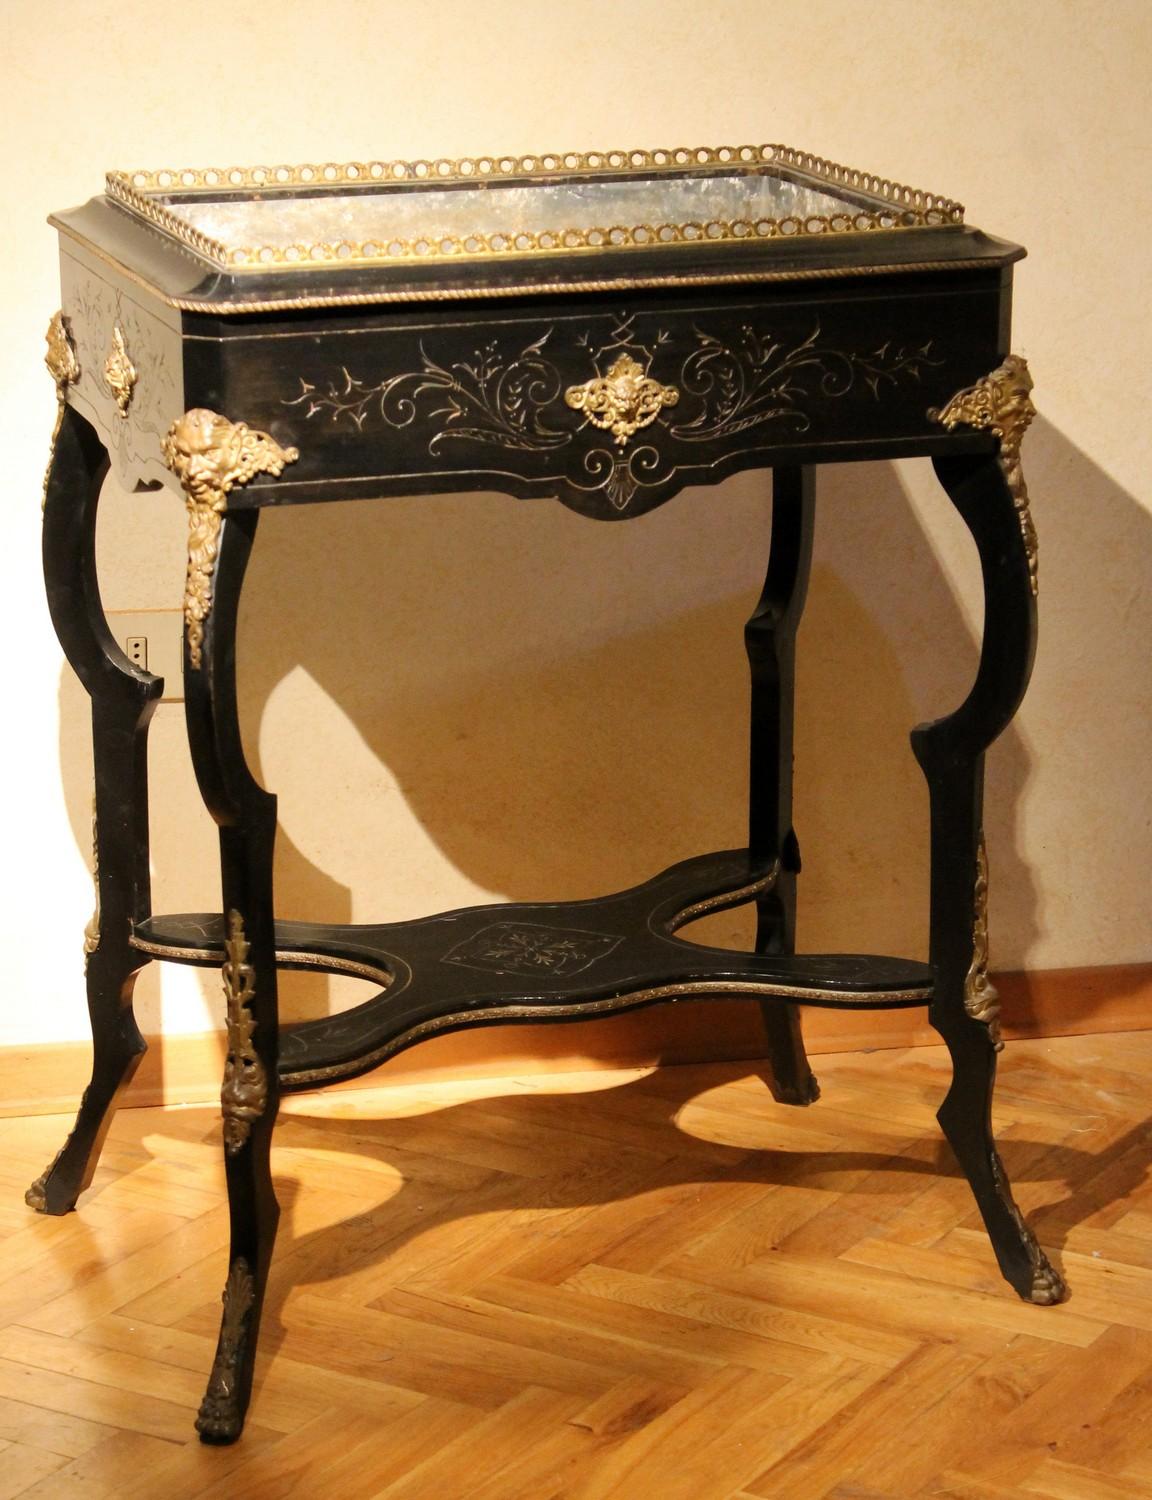 This magnificent French mid-19th century Napoleon III period free standing planter table exhibits detailed craftsmanship, a blackened wood jardinière with pen work inlay and finely chiseled gilt bronze mounts throughout.
The rectangular tabletop -